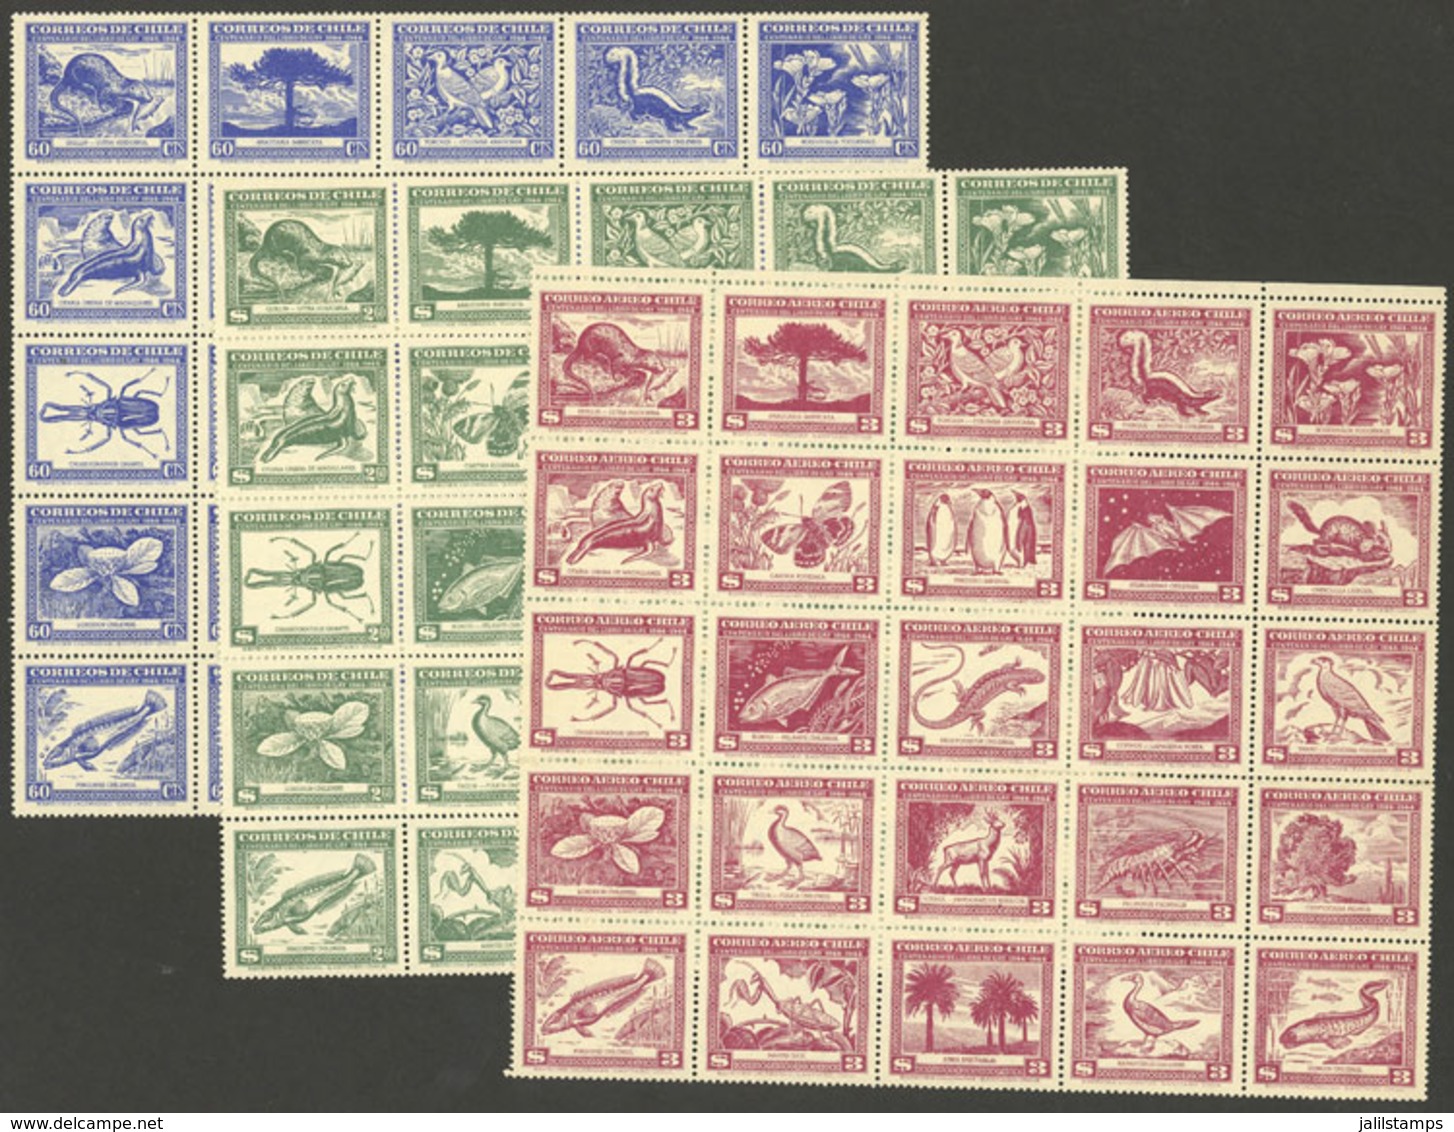 CHILE: Yvert 222/3 + A.121, 1948 Flora & Fauna, The Cmpl. Set Of 75 Stamps, VF Quality, Almost All MNH (only 4 Or 5 Exam - Chile